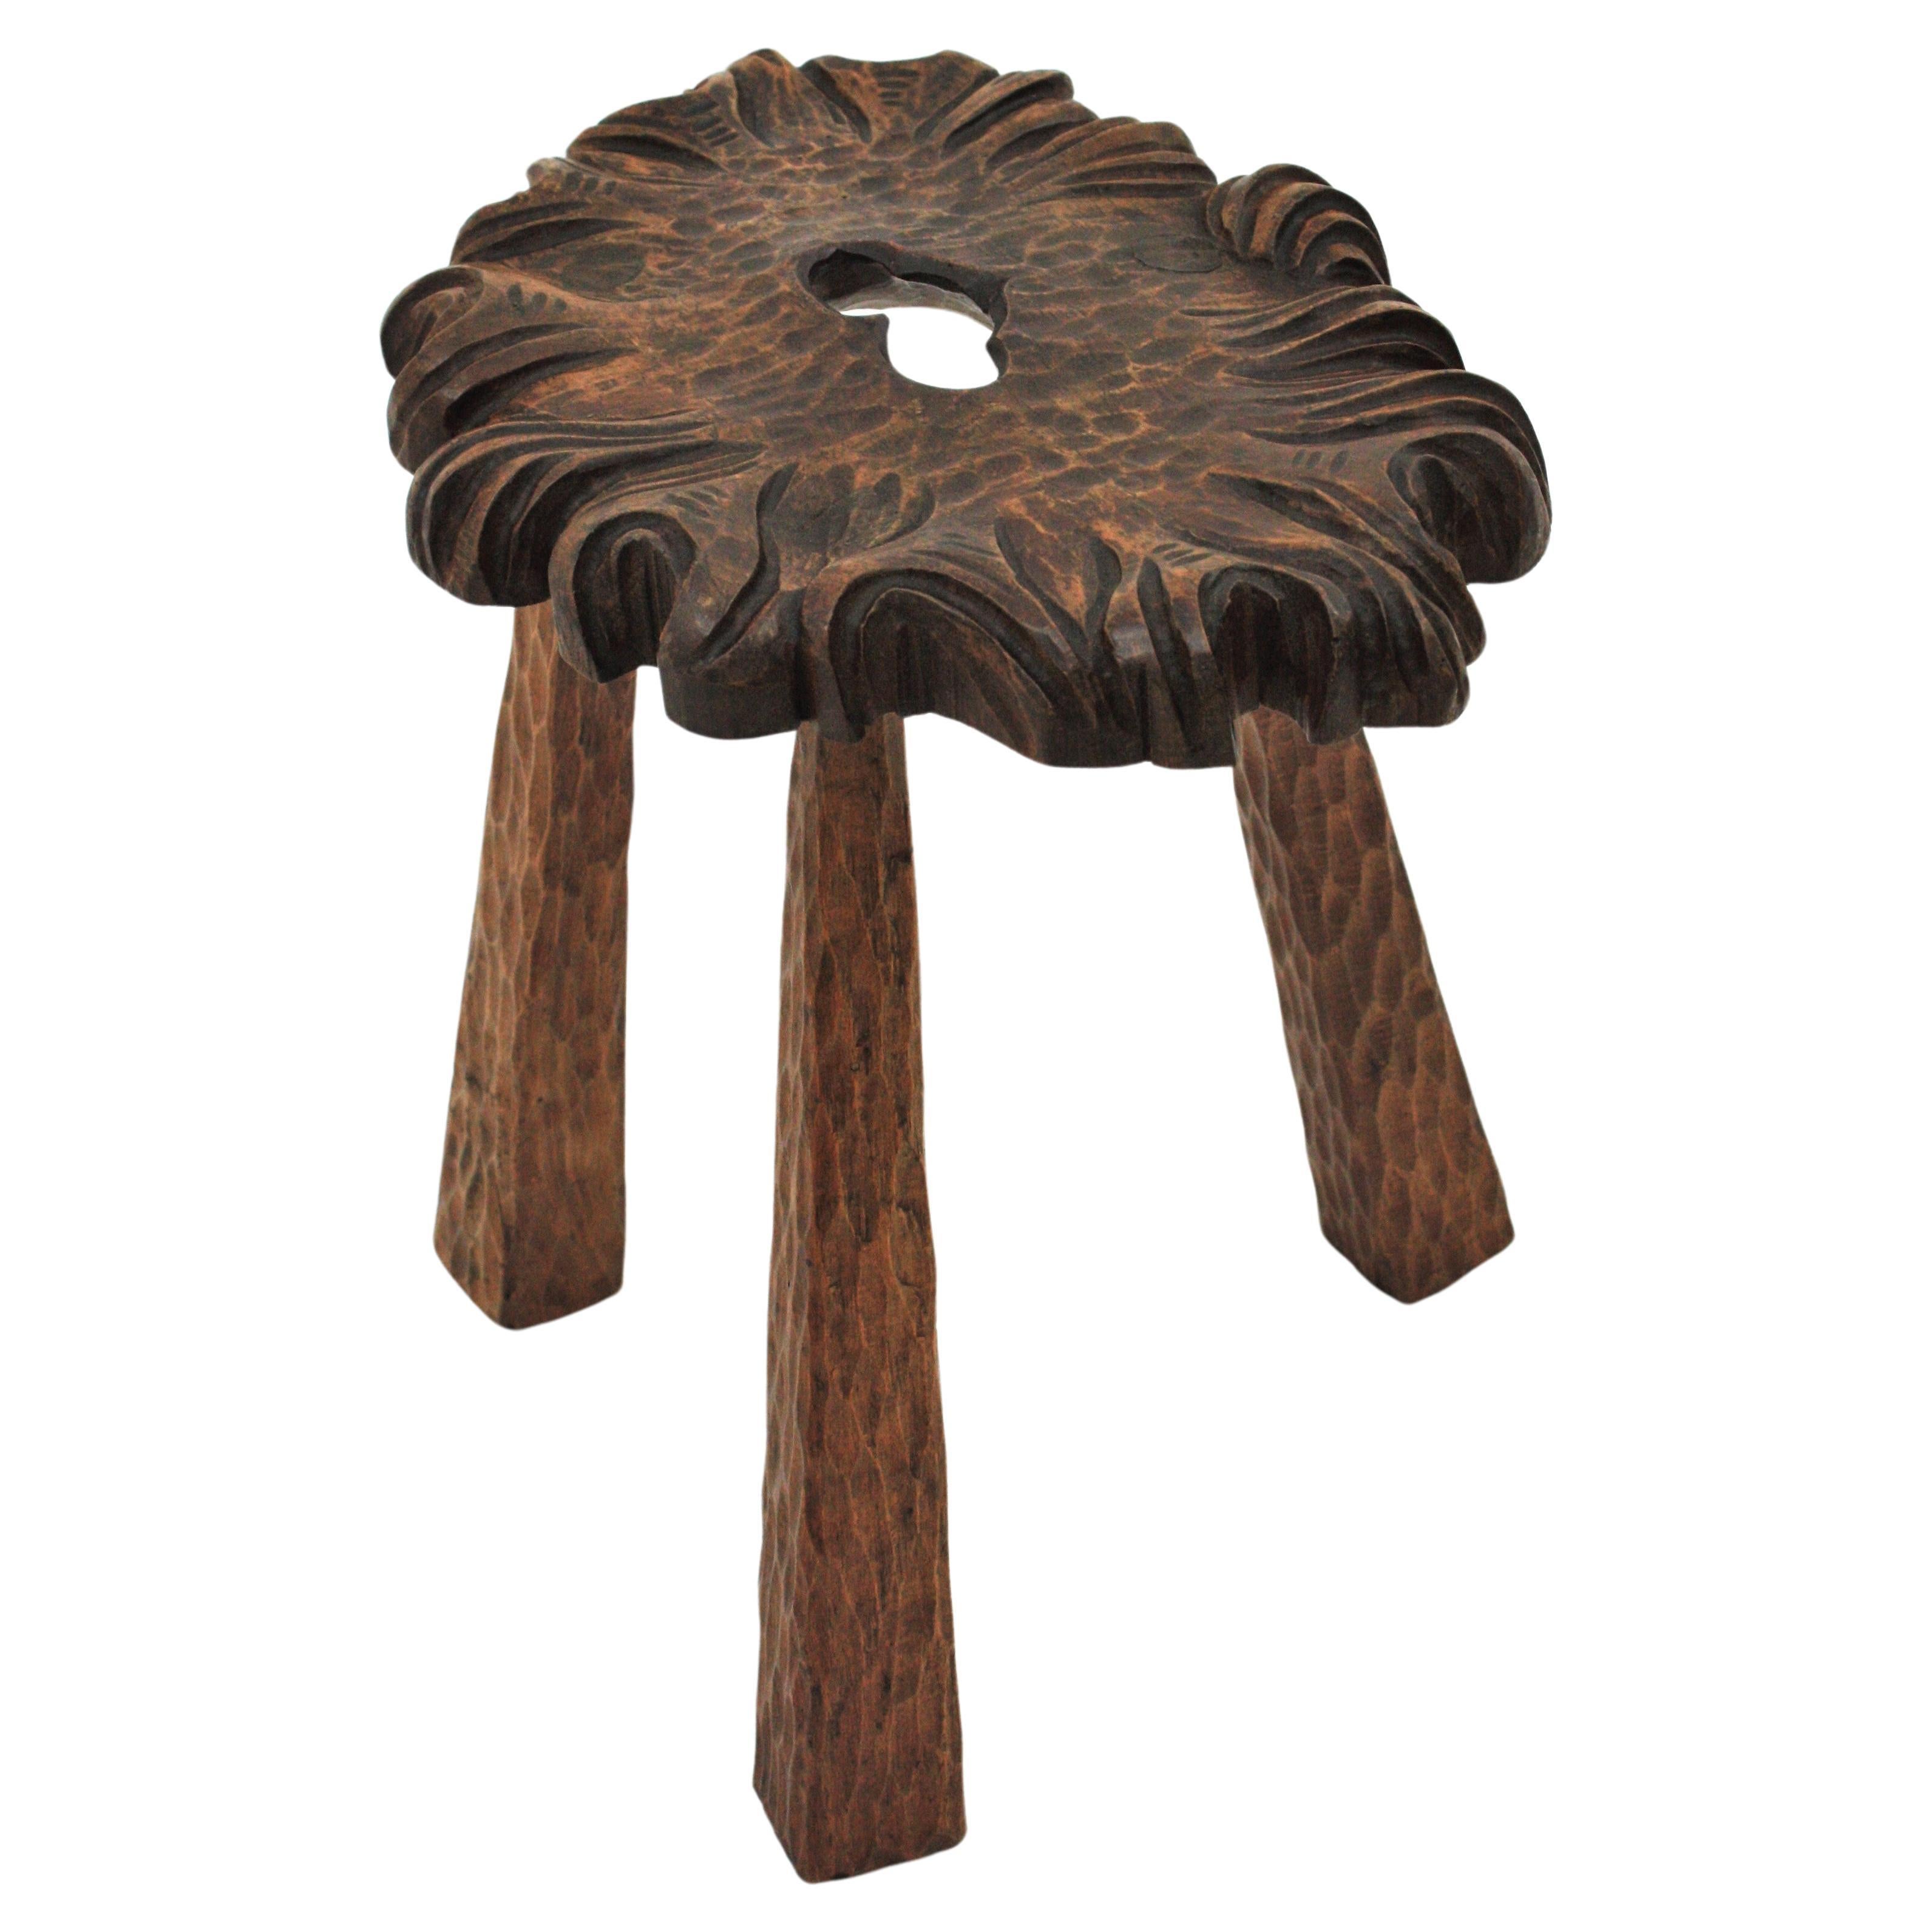 Spanish Rustic Wood Tripod Stool or Side Table For Sale